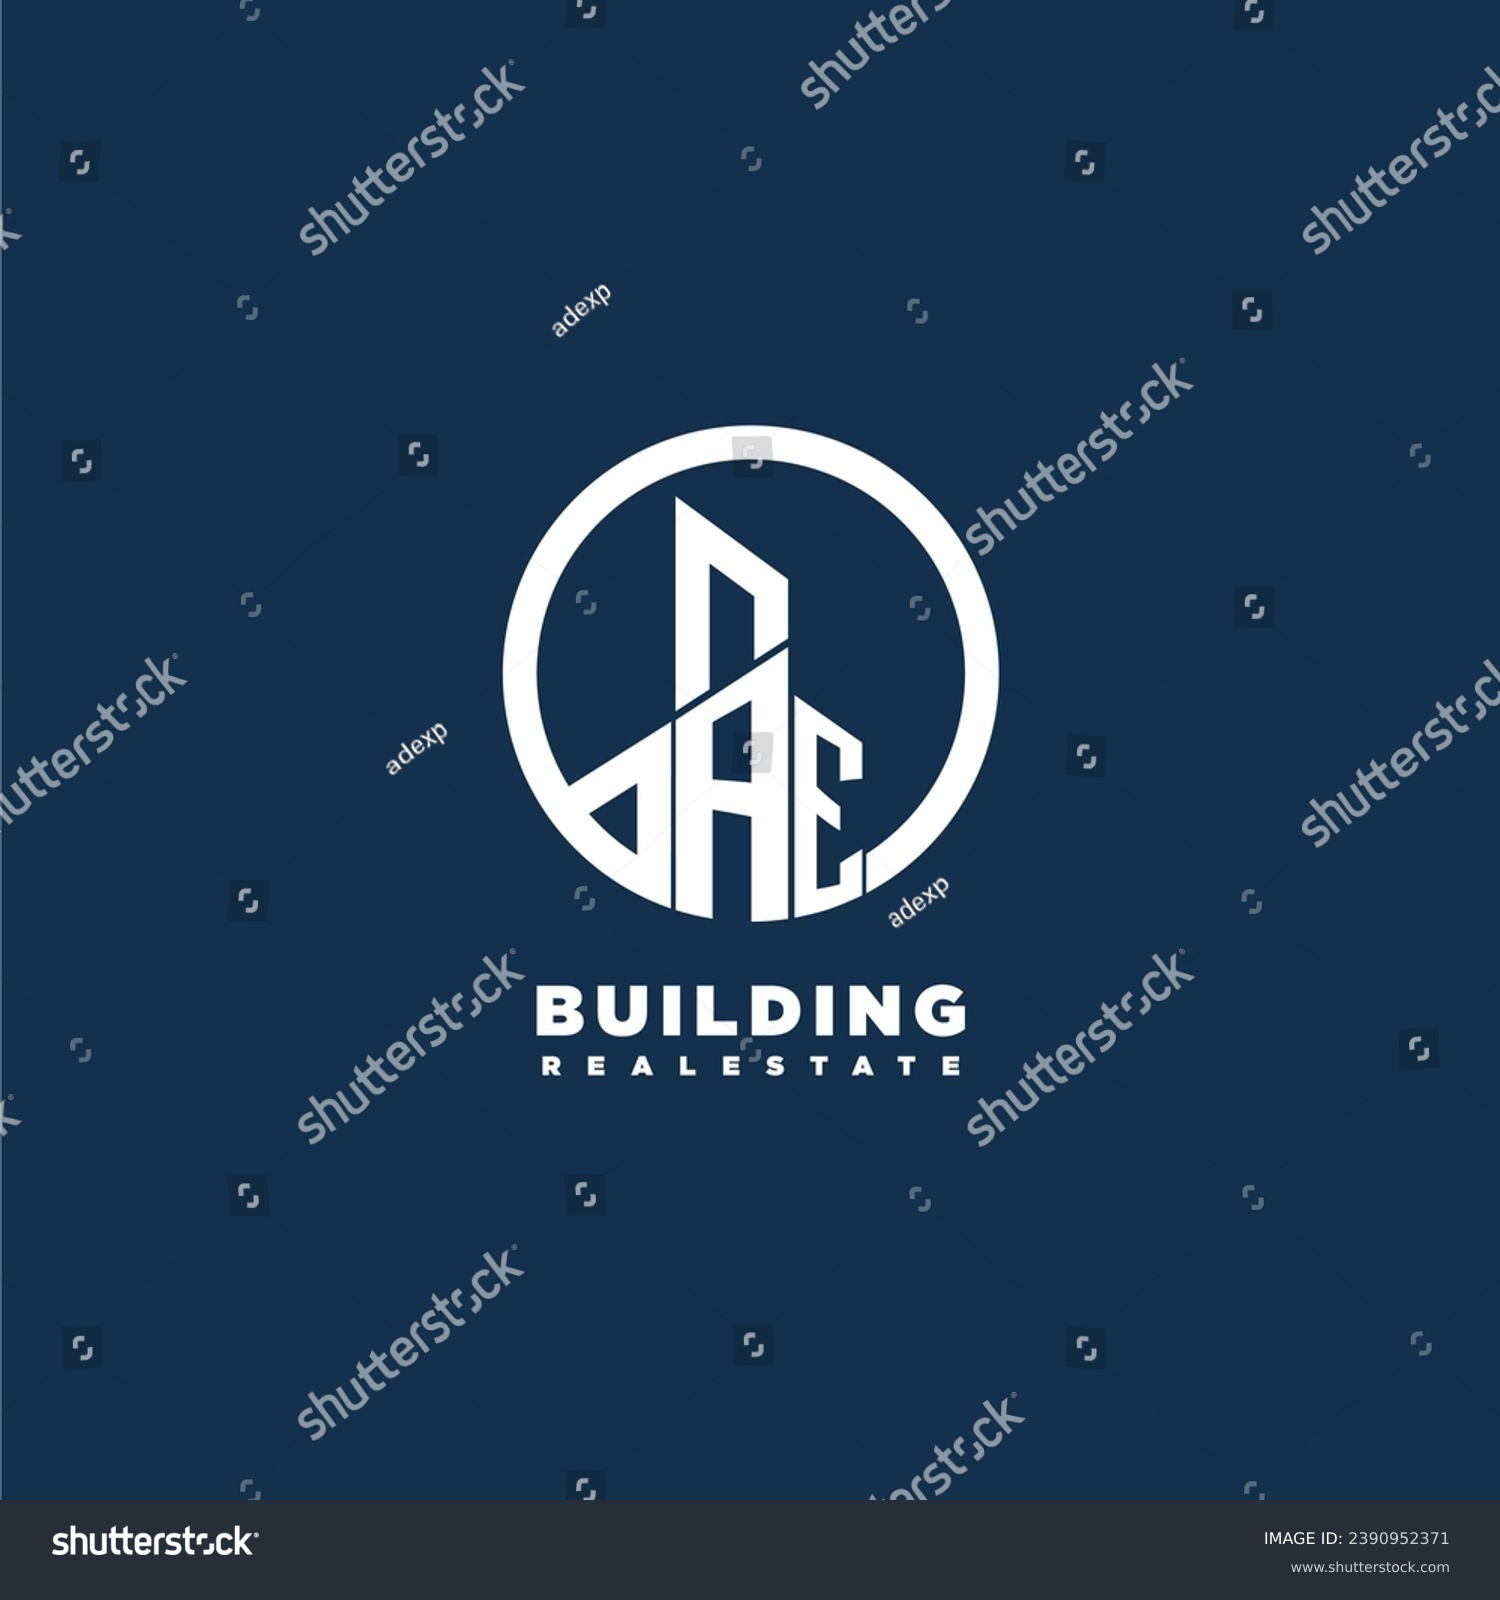 SVG of AE initial monogram building logo for real estate with creative circle style design svg